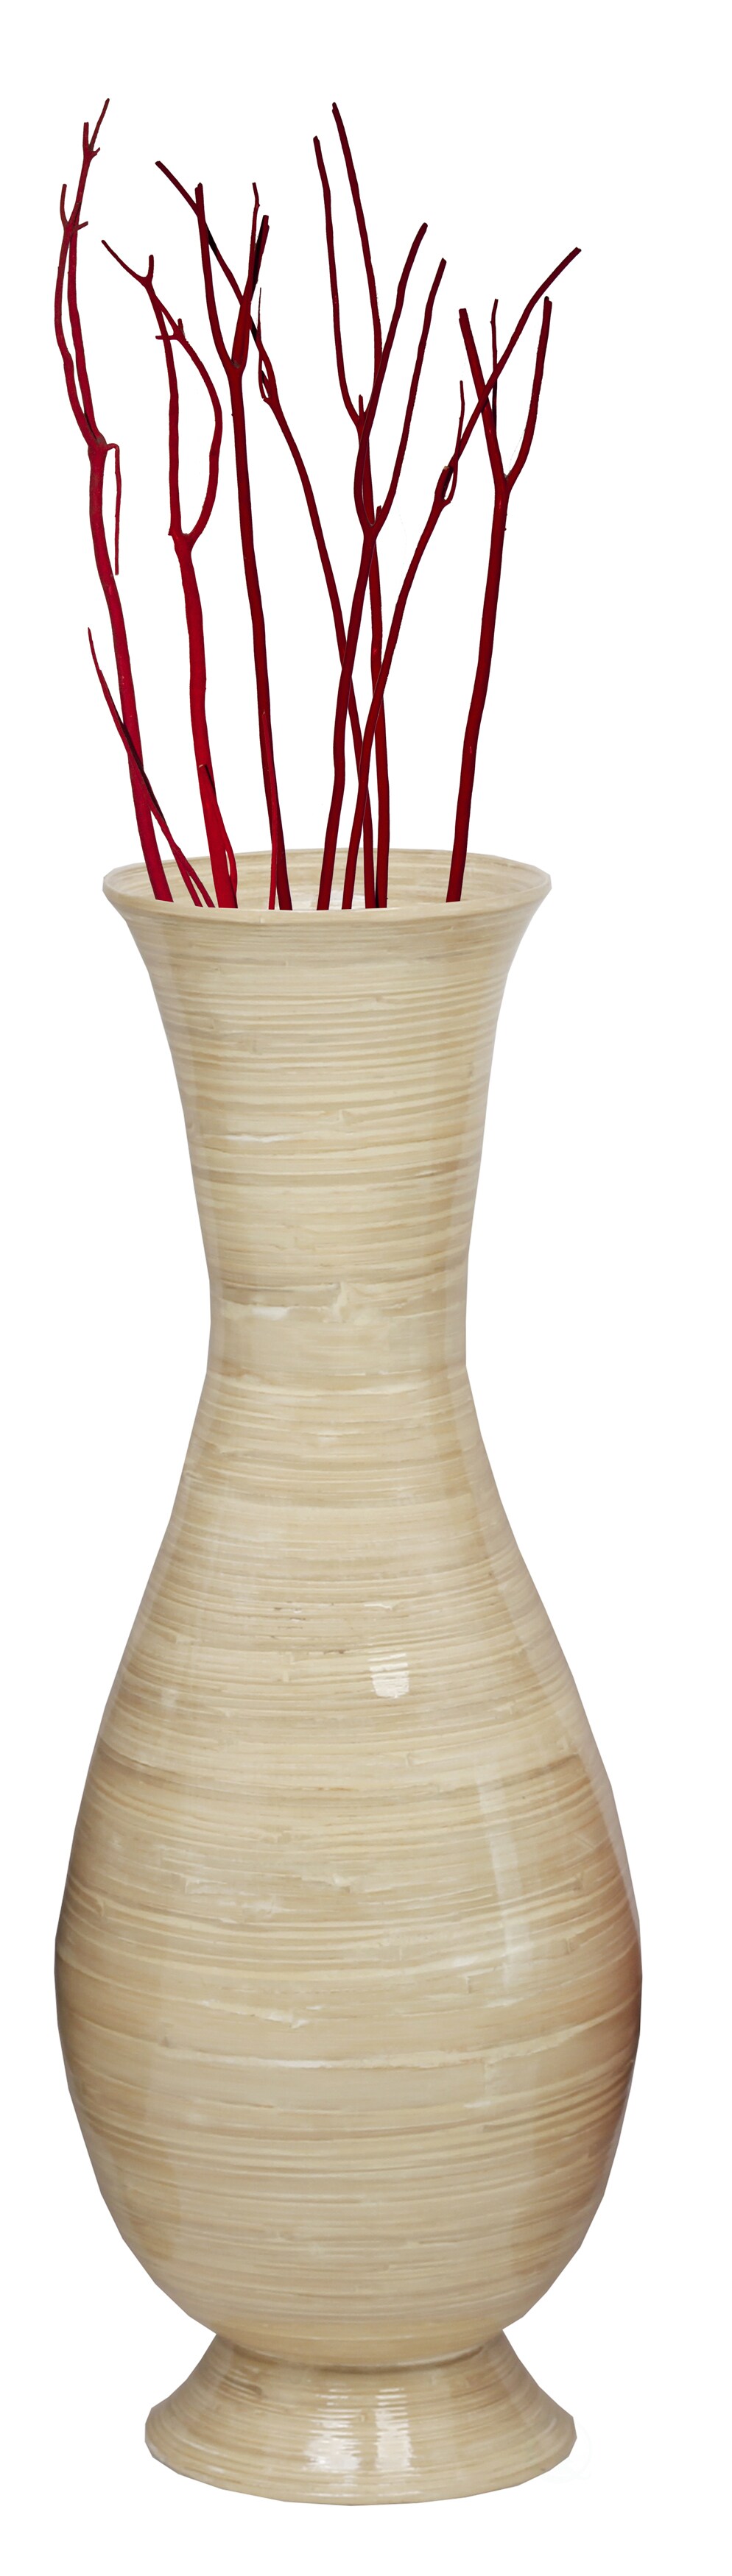 Tall Modern Decorative Floor Vase: Handmade, Natural Bamboo Finish,  Contemporary Home Décor, Handcrafted Bamboo, Elegant Interior Design,  Bamboo Craftsmanship, Statement Piece for Modern Spaces